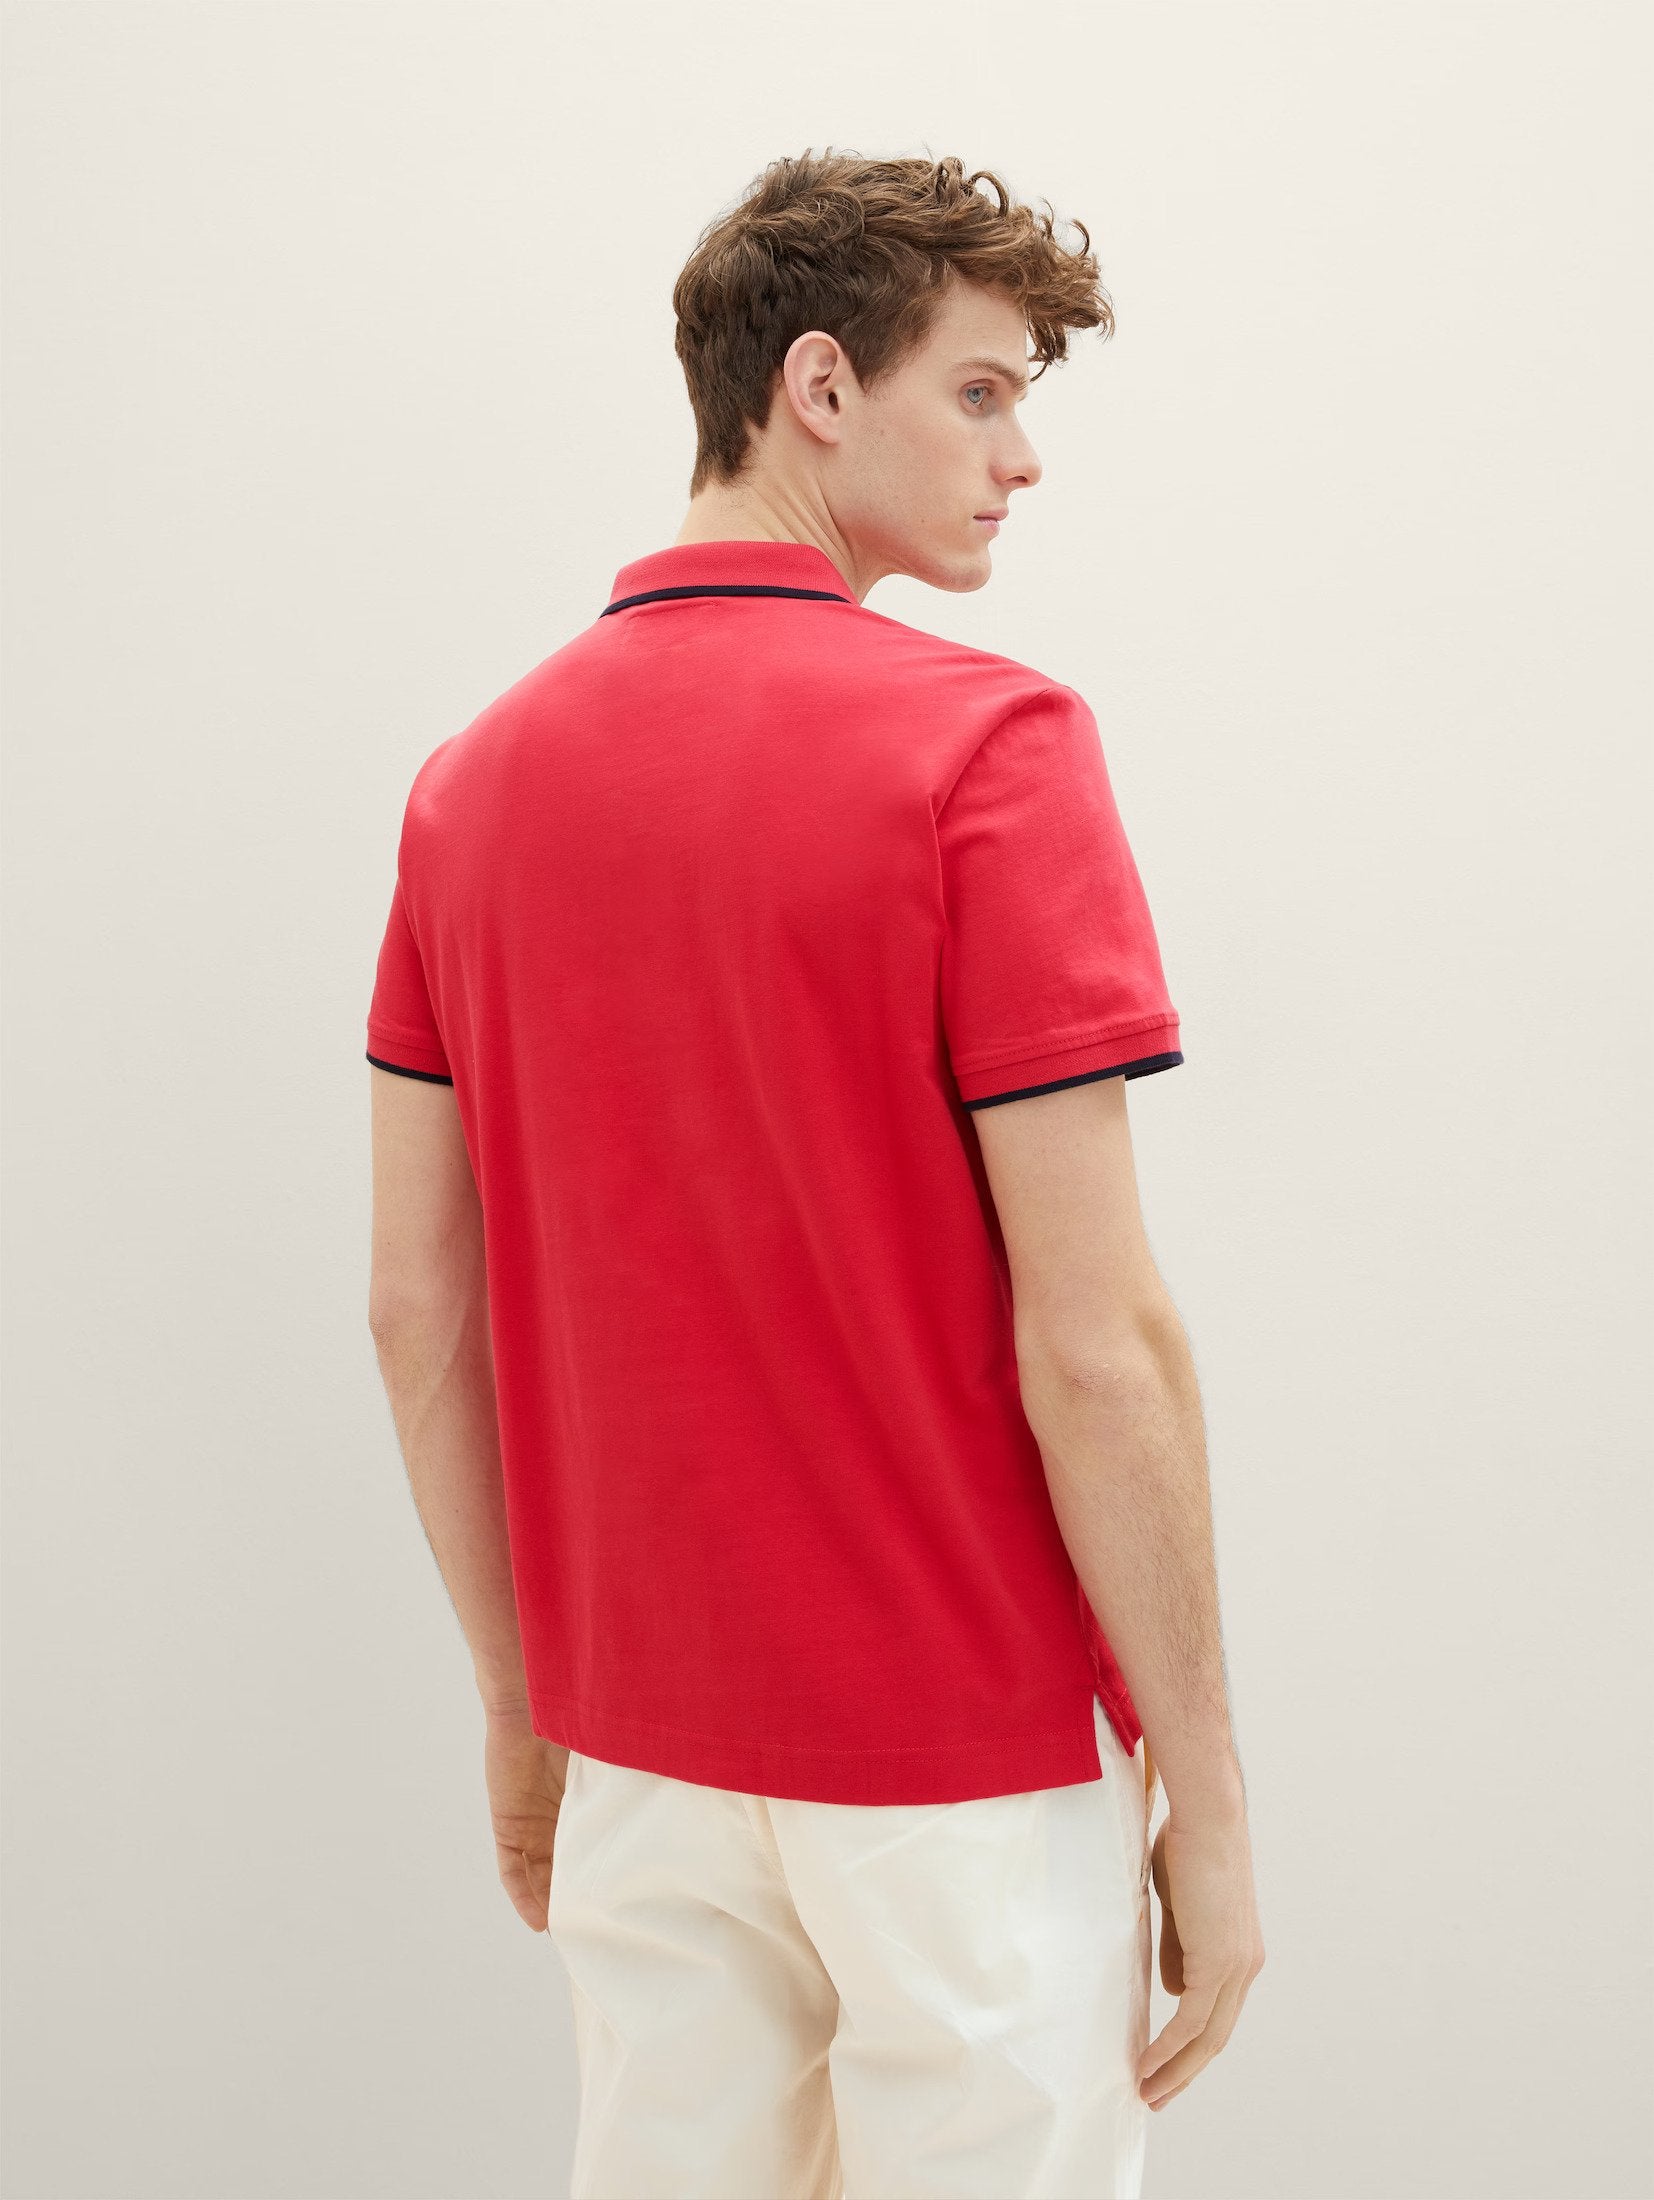 Tom Tailor Red Polo With Black Designed Ends